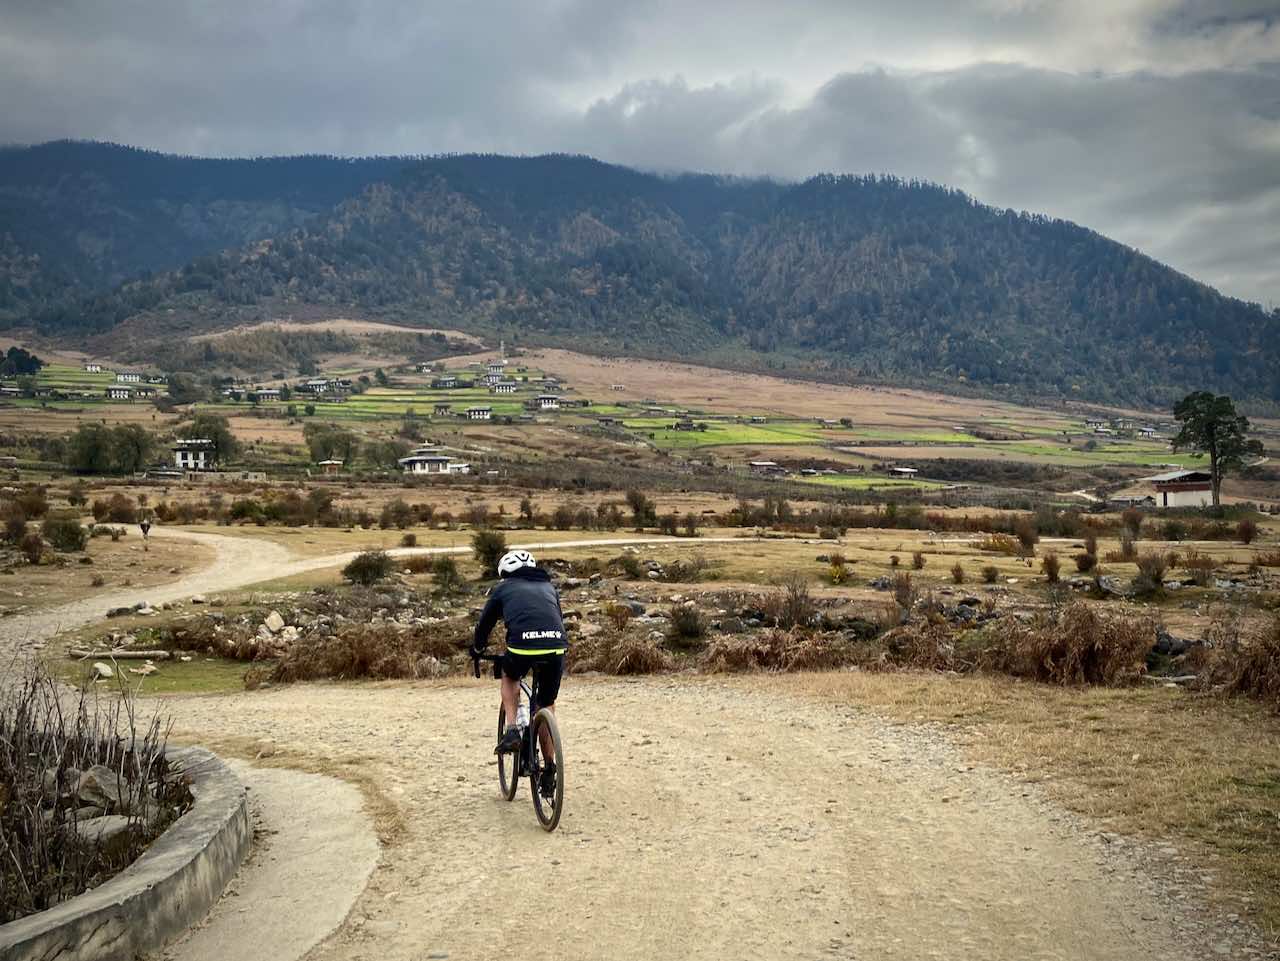 A cyclists on a gravel road in Bhutan